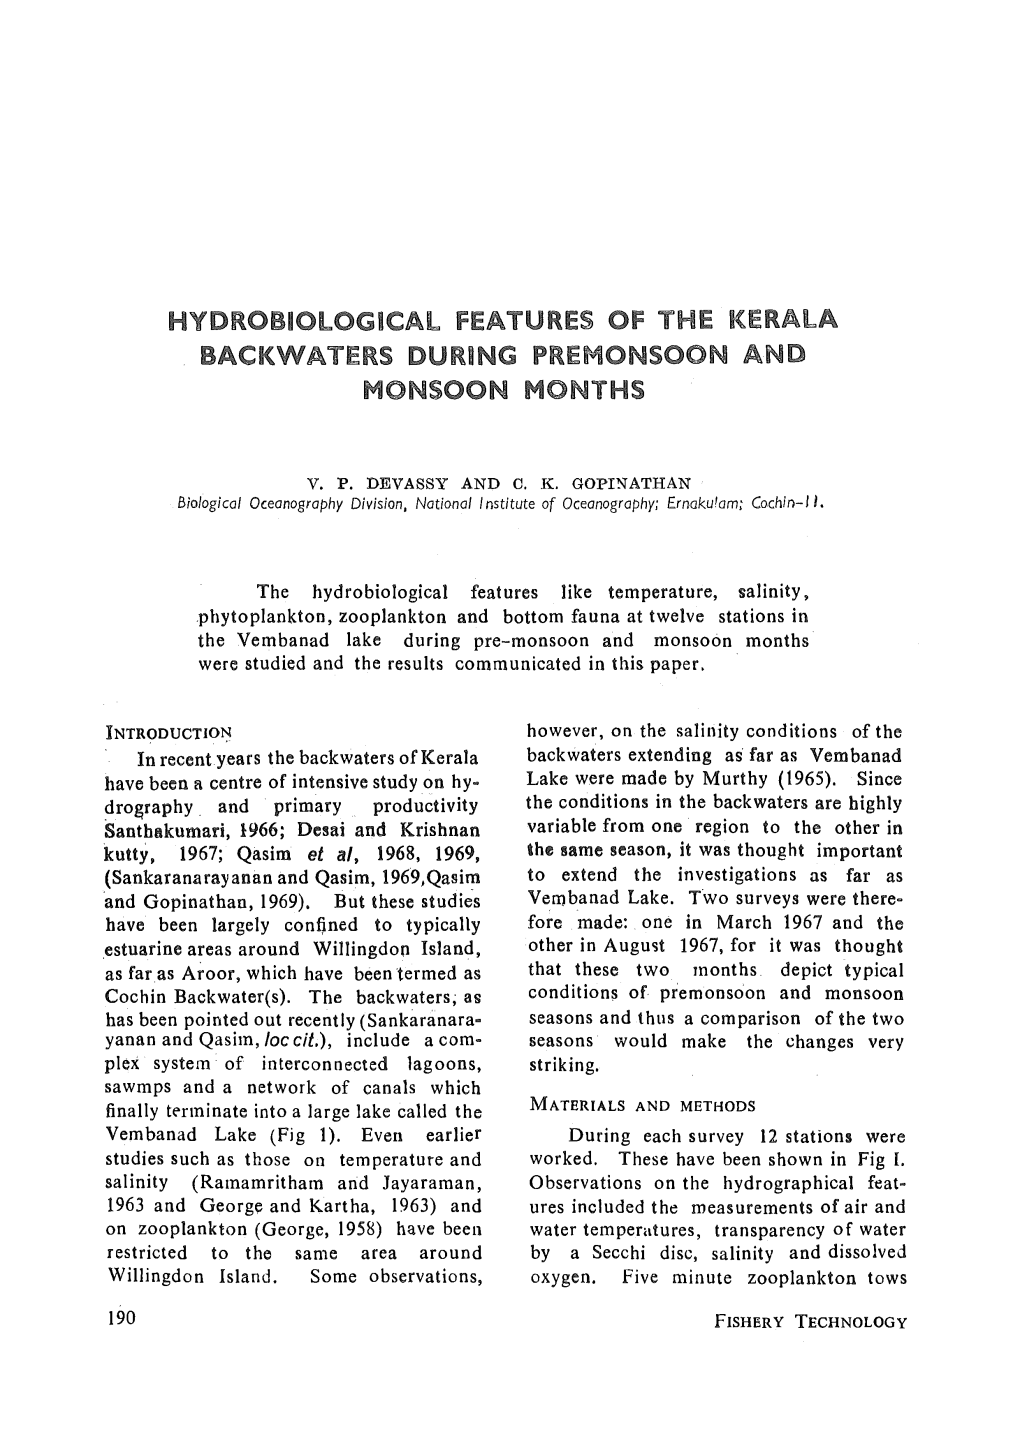 Hydrobiological Features of the Kerala Backwaters During Premonsoon and Monsoon Months